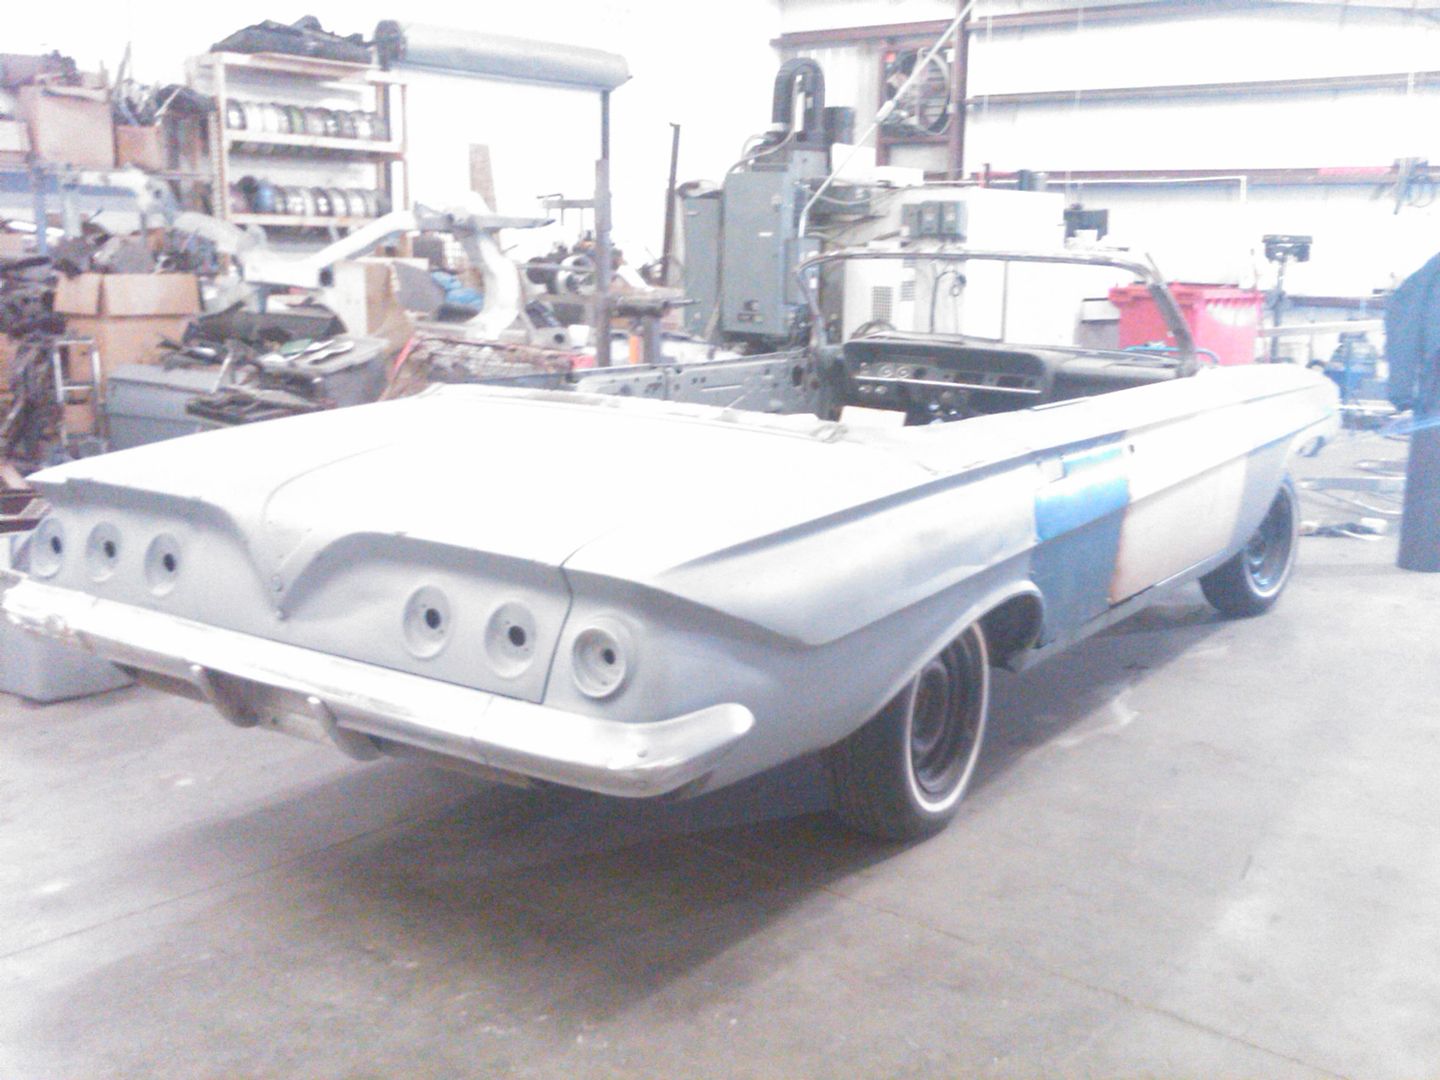 61 Impala Convertible solid conversion project FORSALE 7000